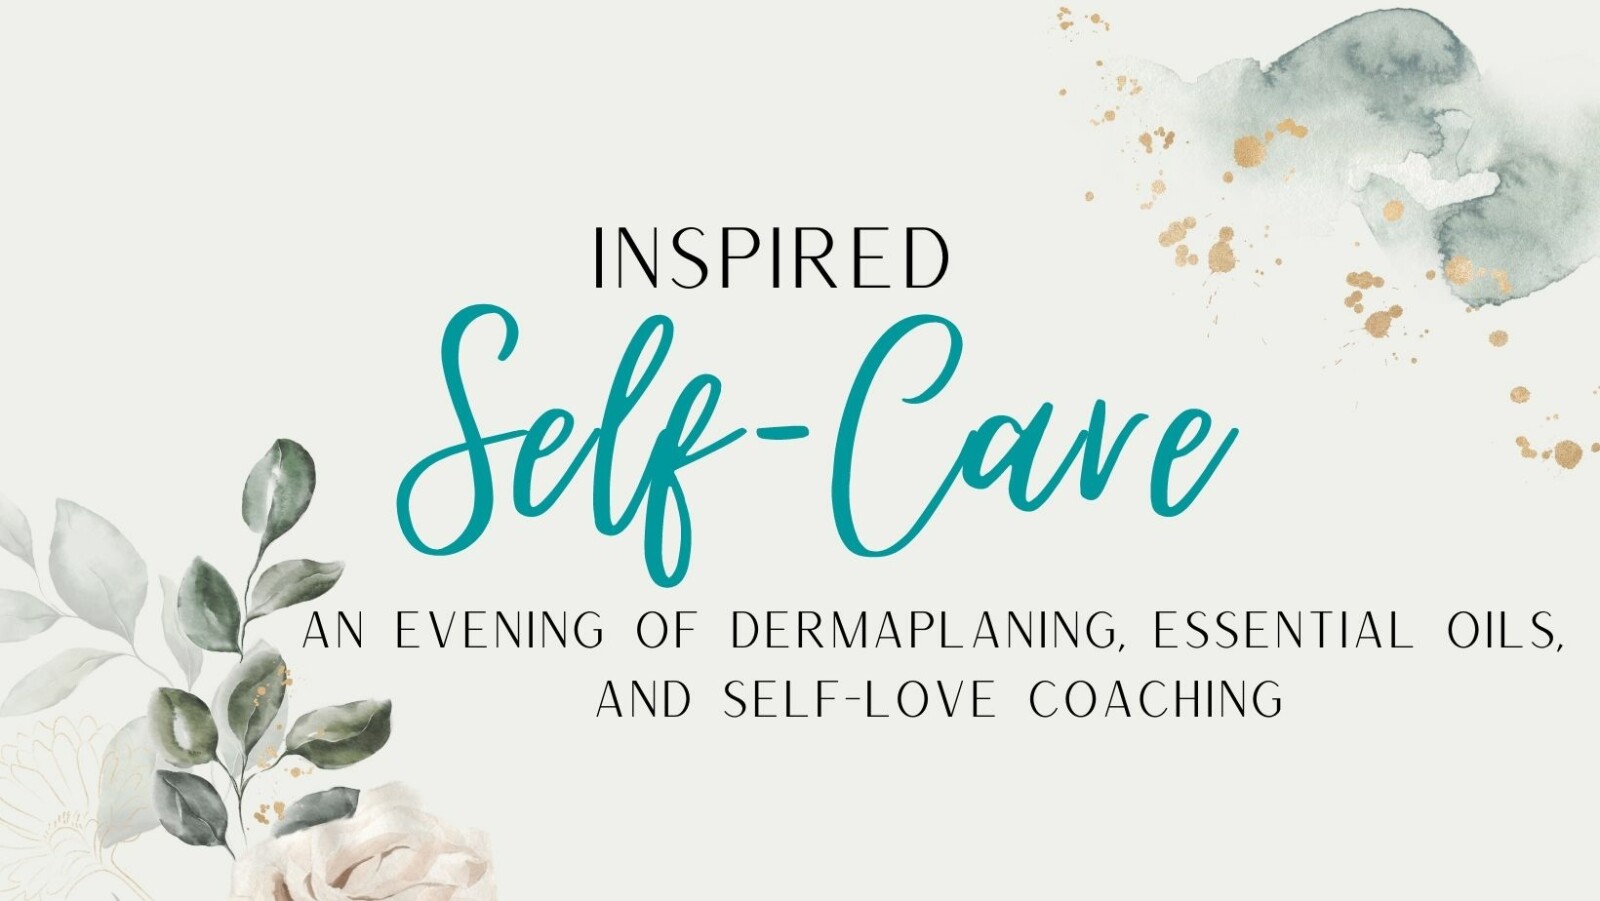  Inspired Self-Care August 11th